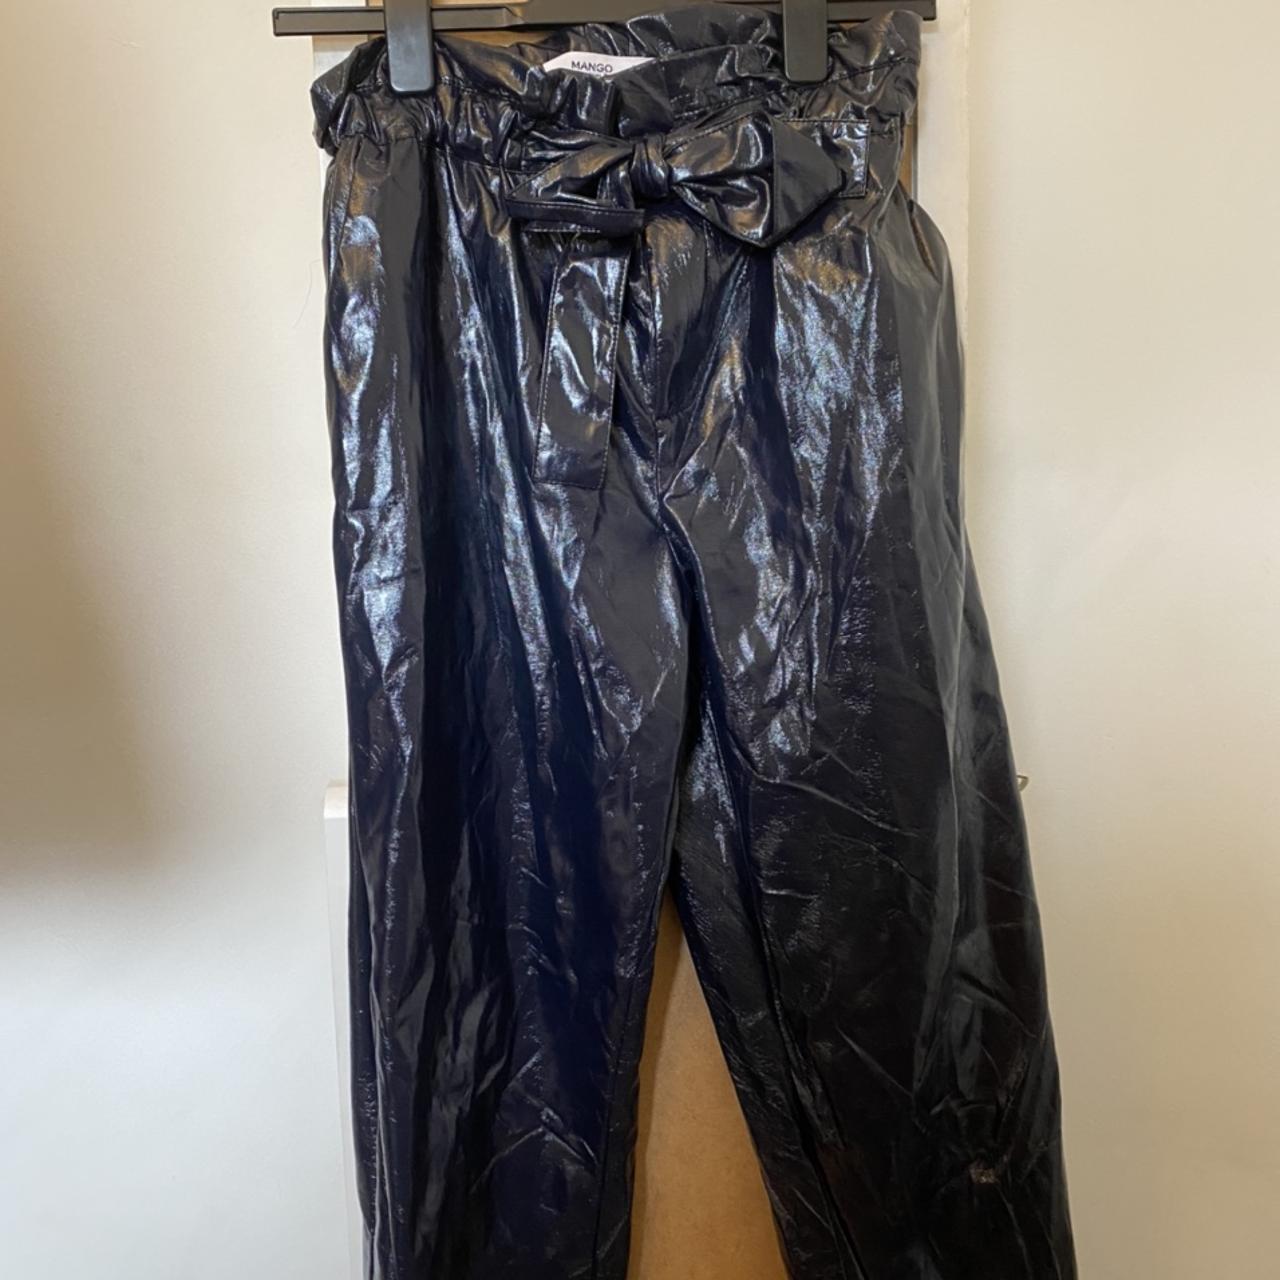 Mango dustbin bag trousers. Extremely trendy and... - Depop